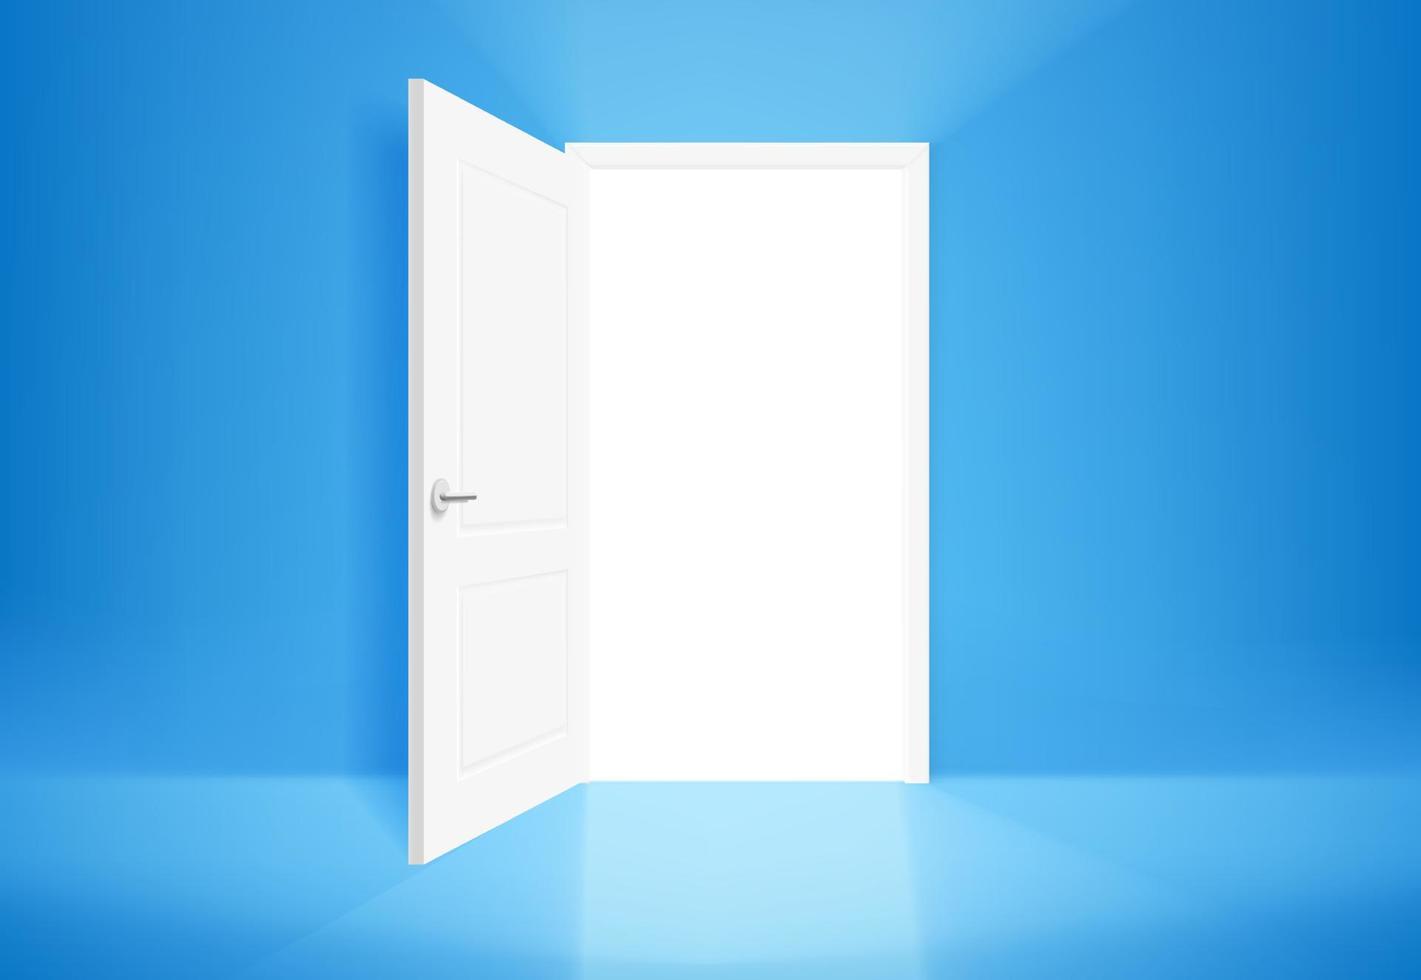 Opened door with shining way and blue wall. Realistic 3d style vector illustration